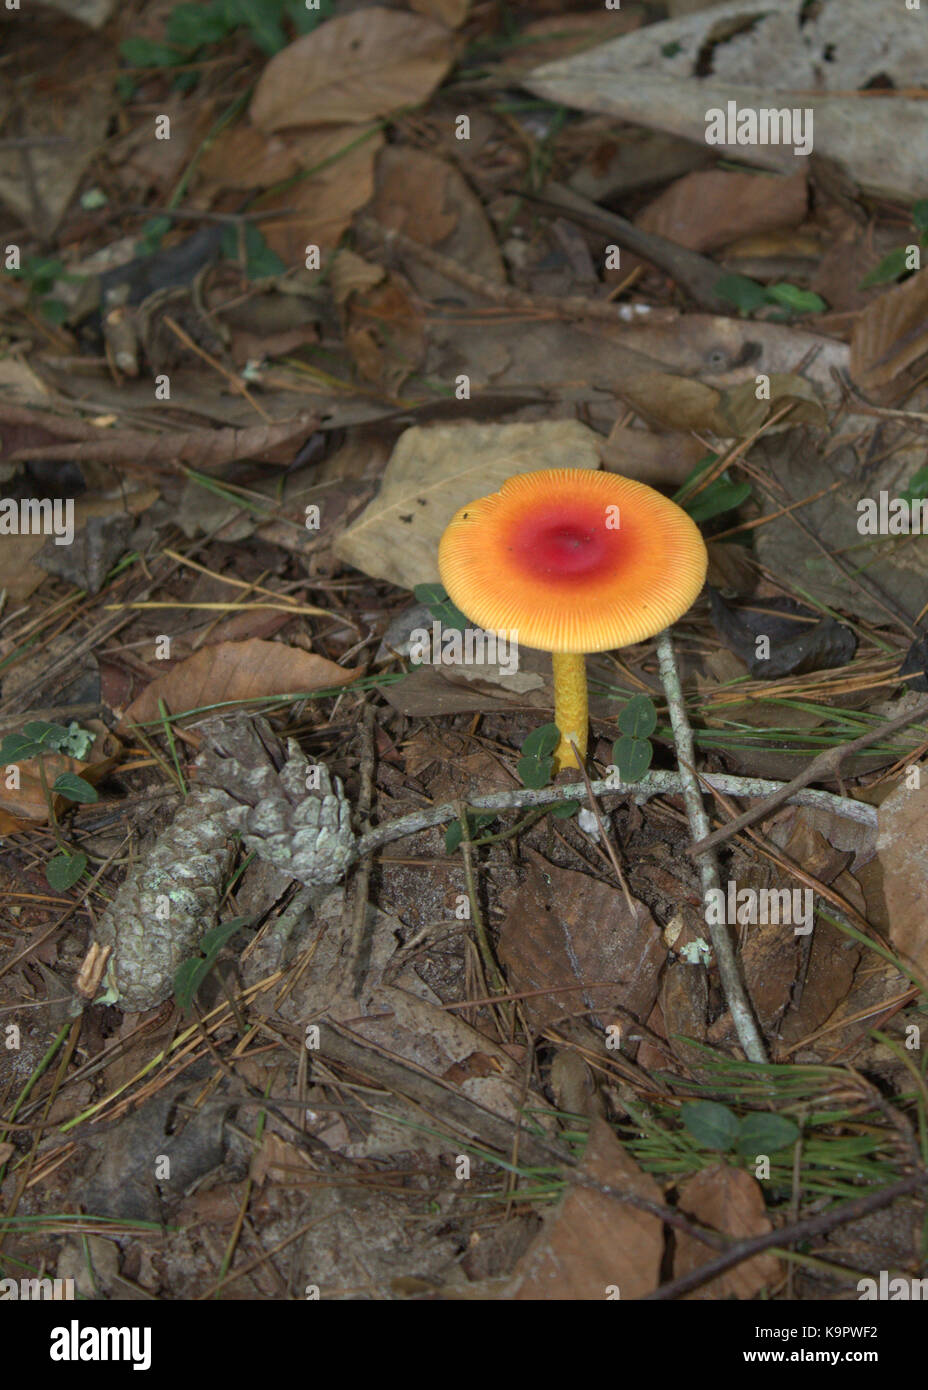 Red and yellow mushroom growing in a bed of fallen leaves and forest debris. Stock Photo